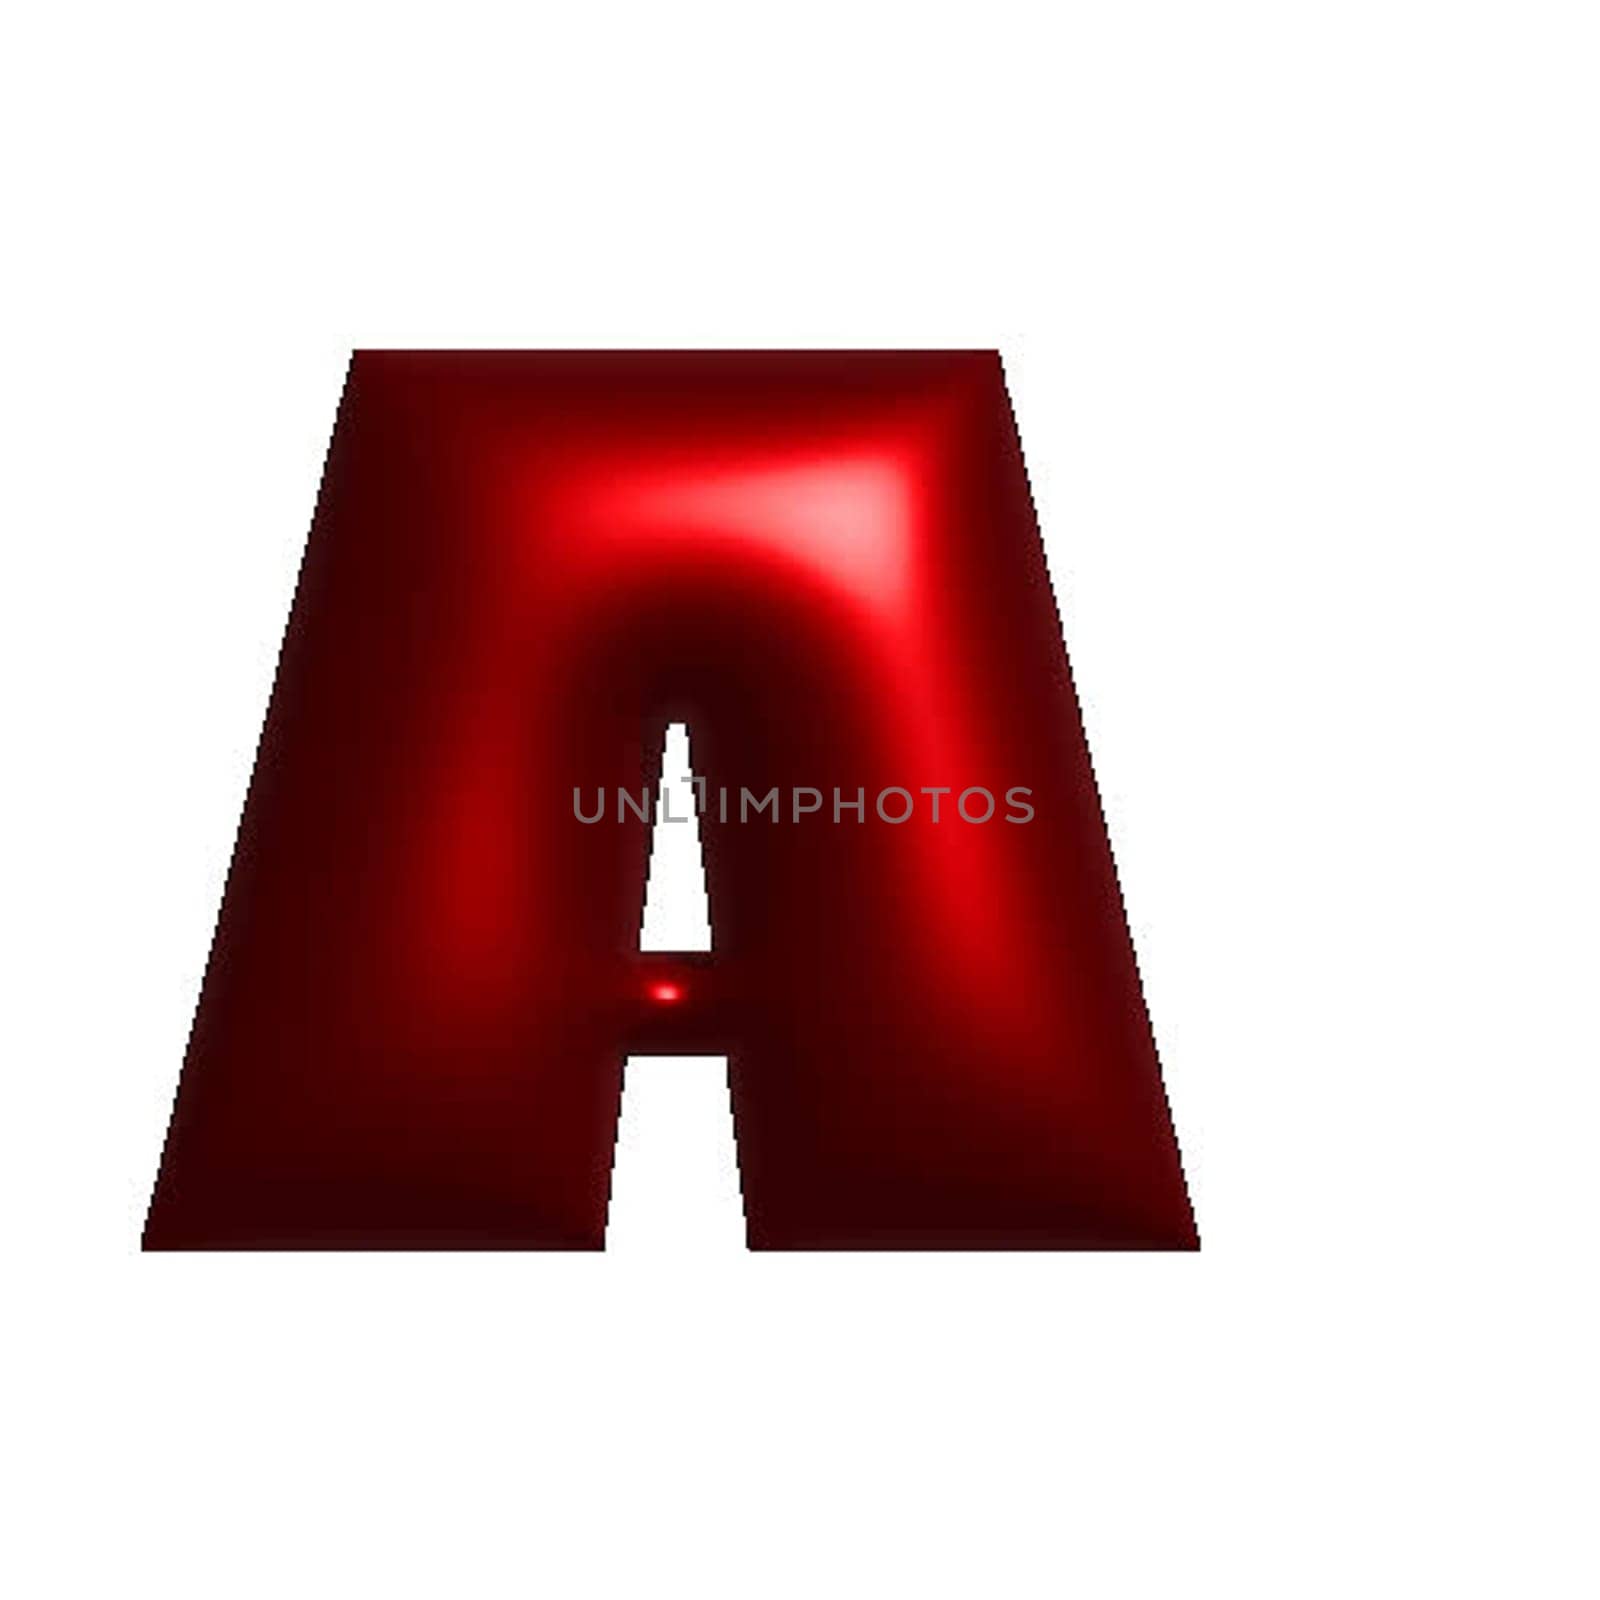 Red shiny metal letter A 3D illustration by Dustick